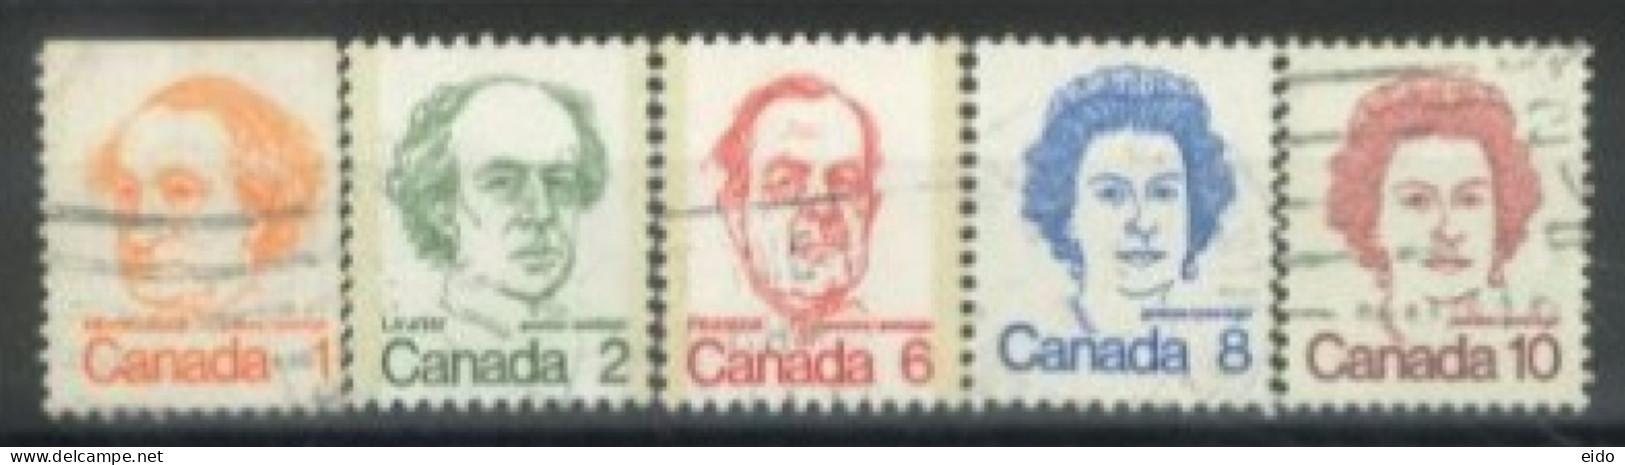 CANADA - 1972, CELEBRITIES STAMPS SET OF 5, USED. - Gebraucht